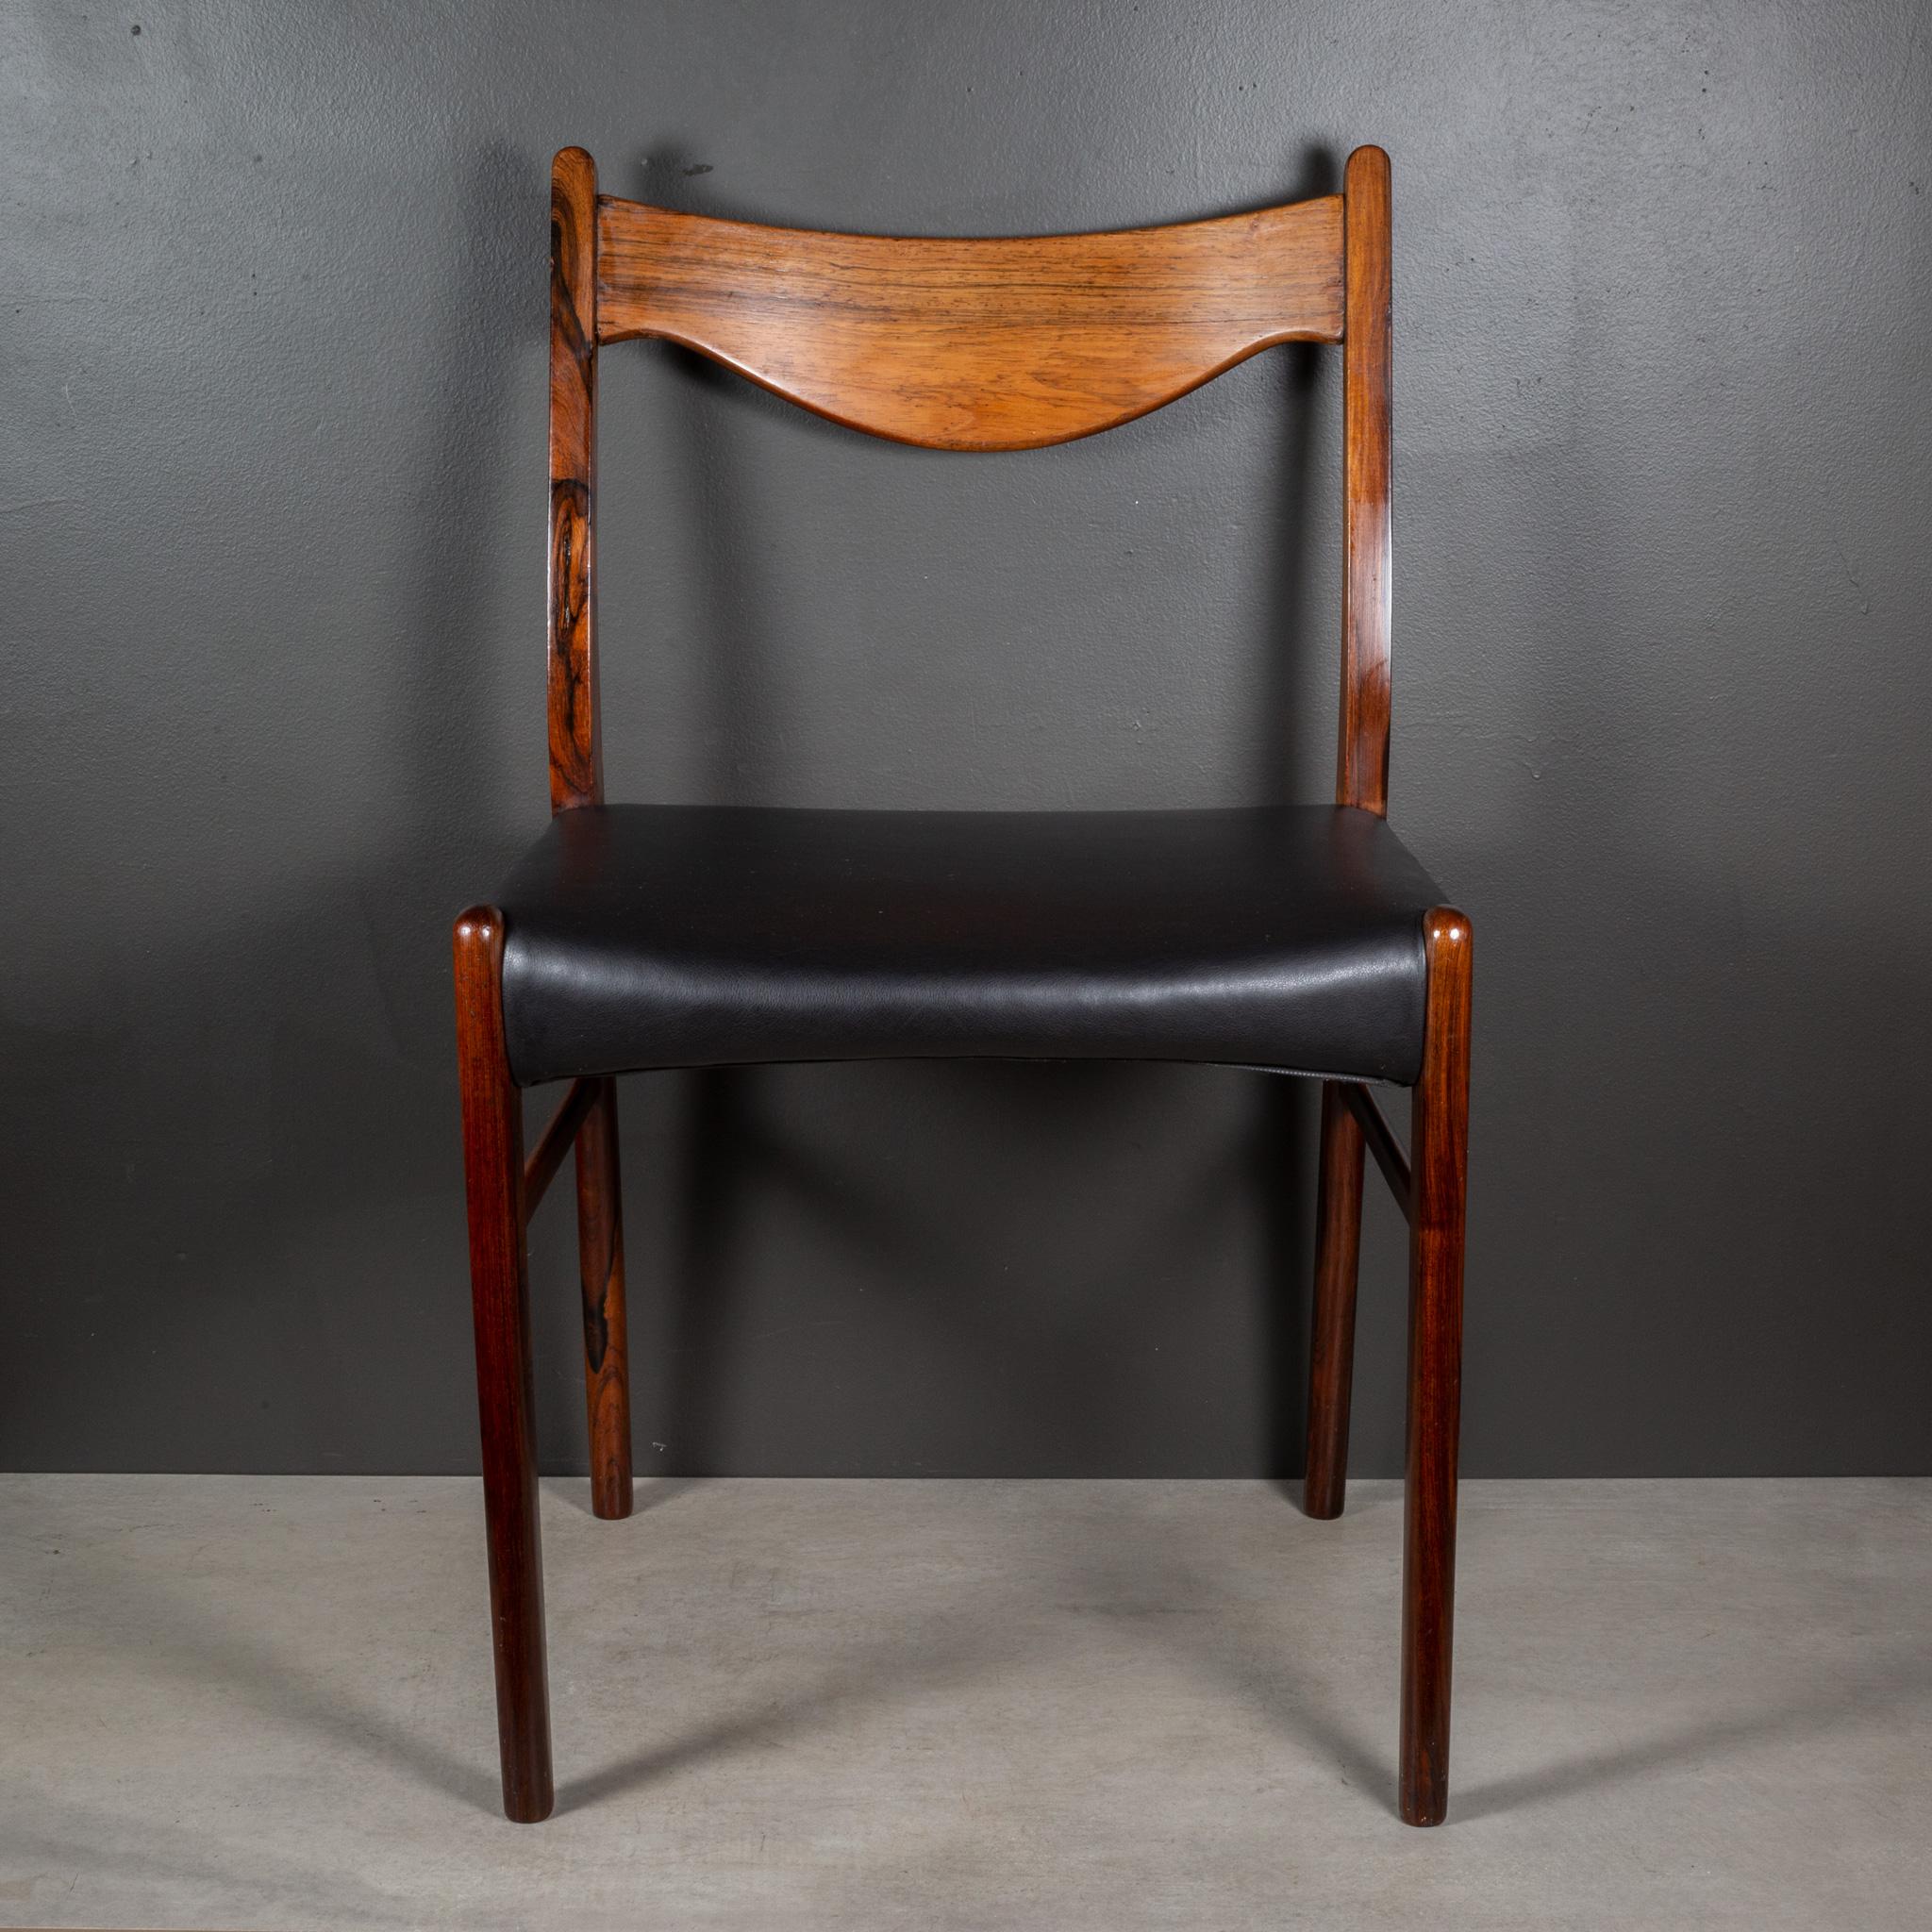 Arne Wahl Iversen Model GS61 Rosewood and Leather Dining Chairs c.1950 For Sale 5